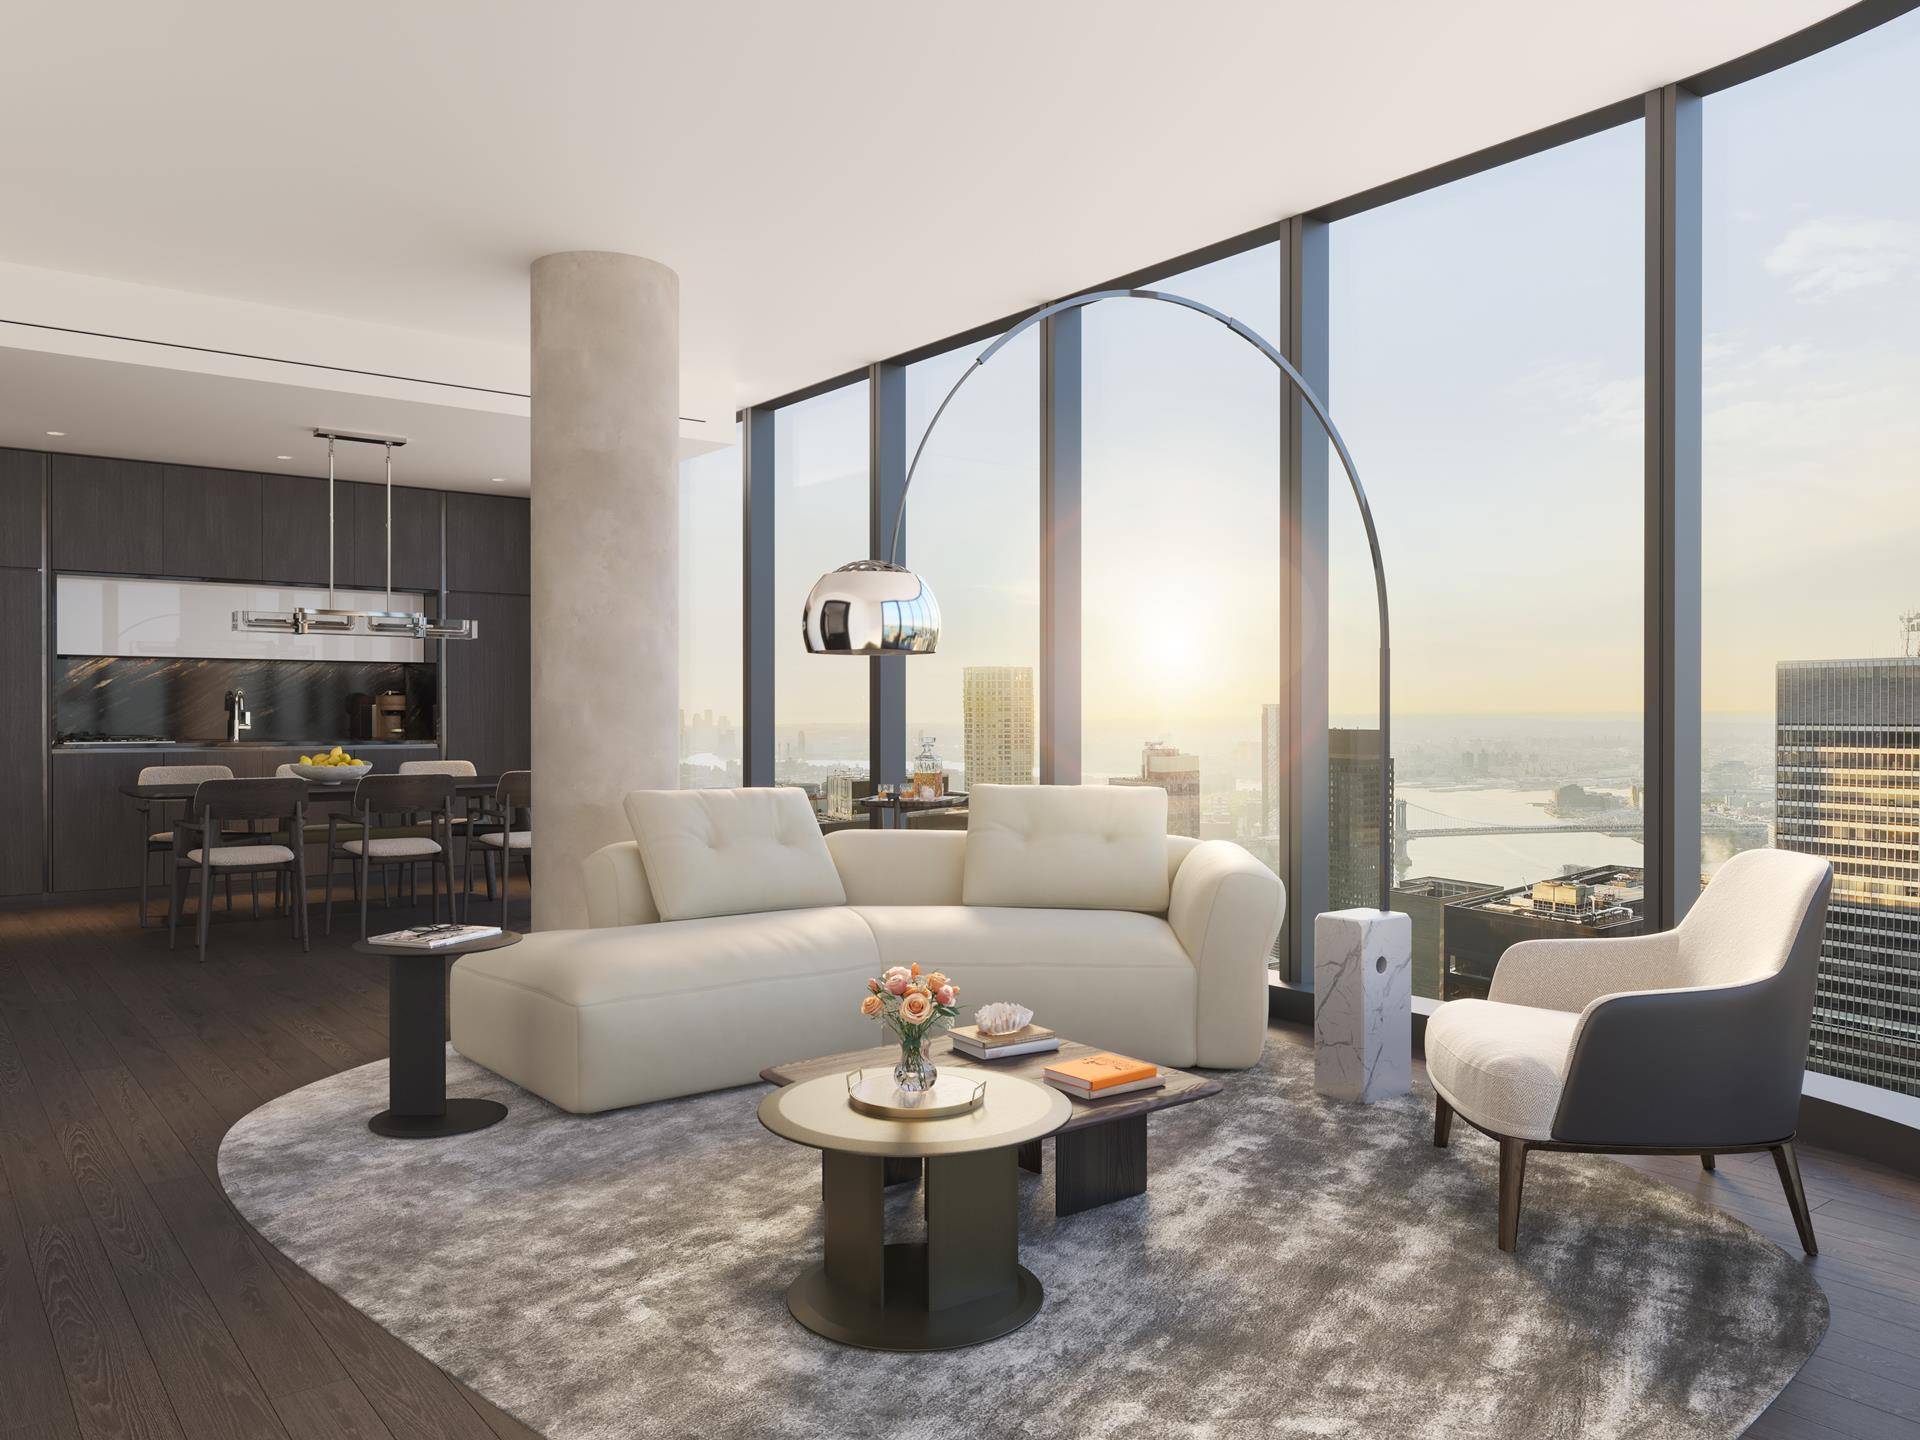 Welcome to Residence 50A at The Greenwich by Rafael Vi oly, where elevated living meets unparalleled views.